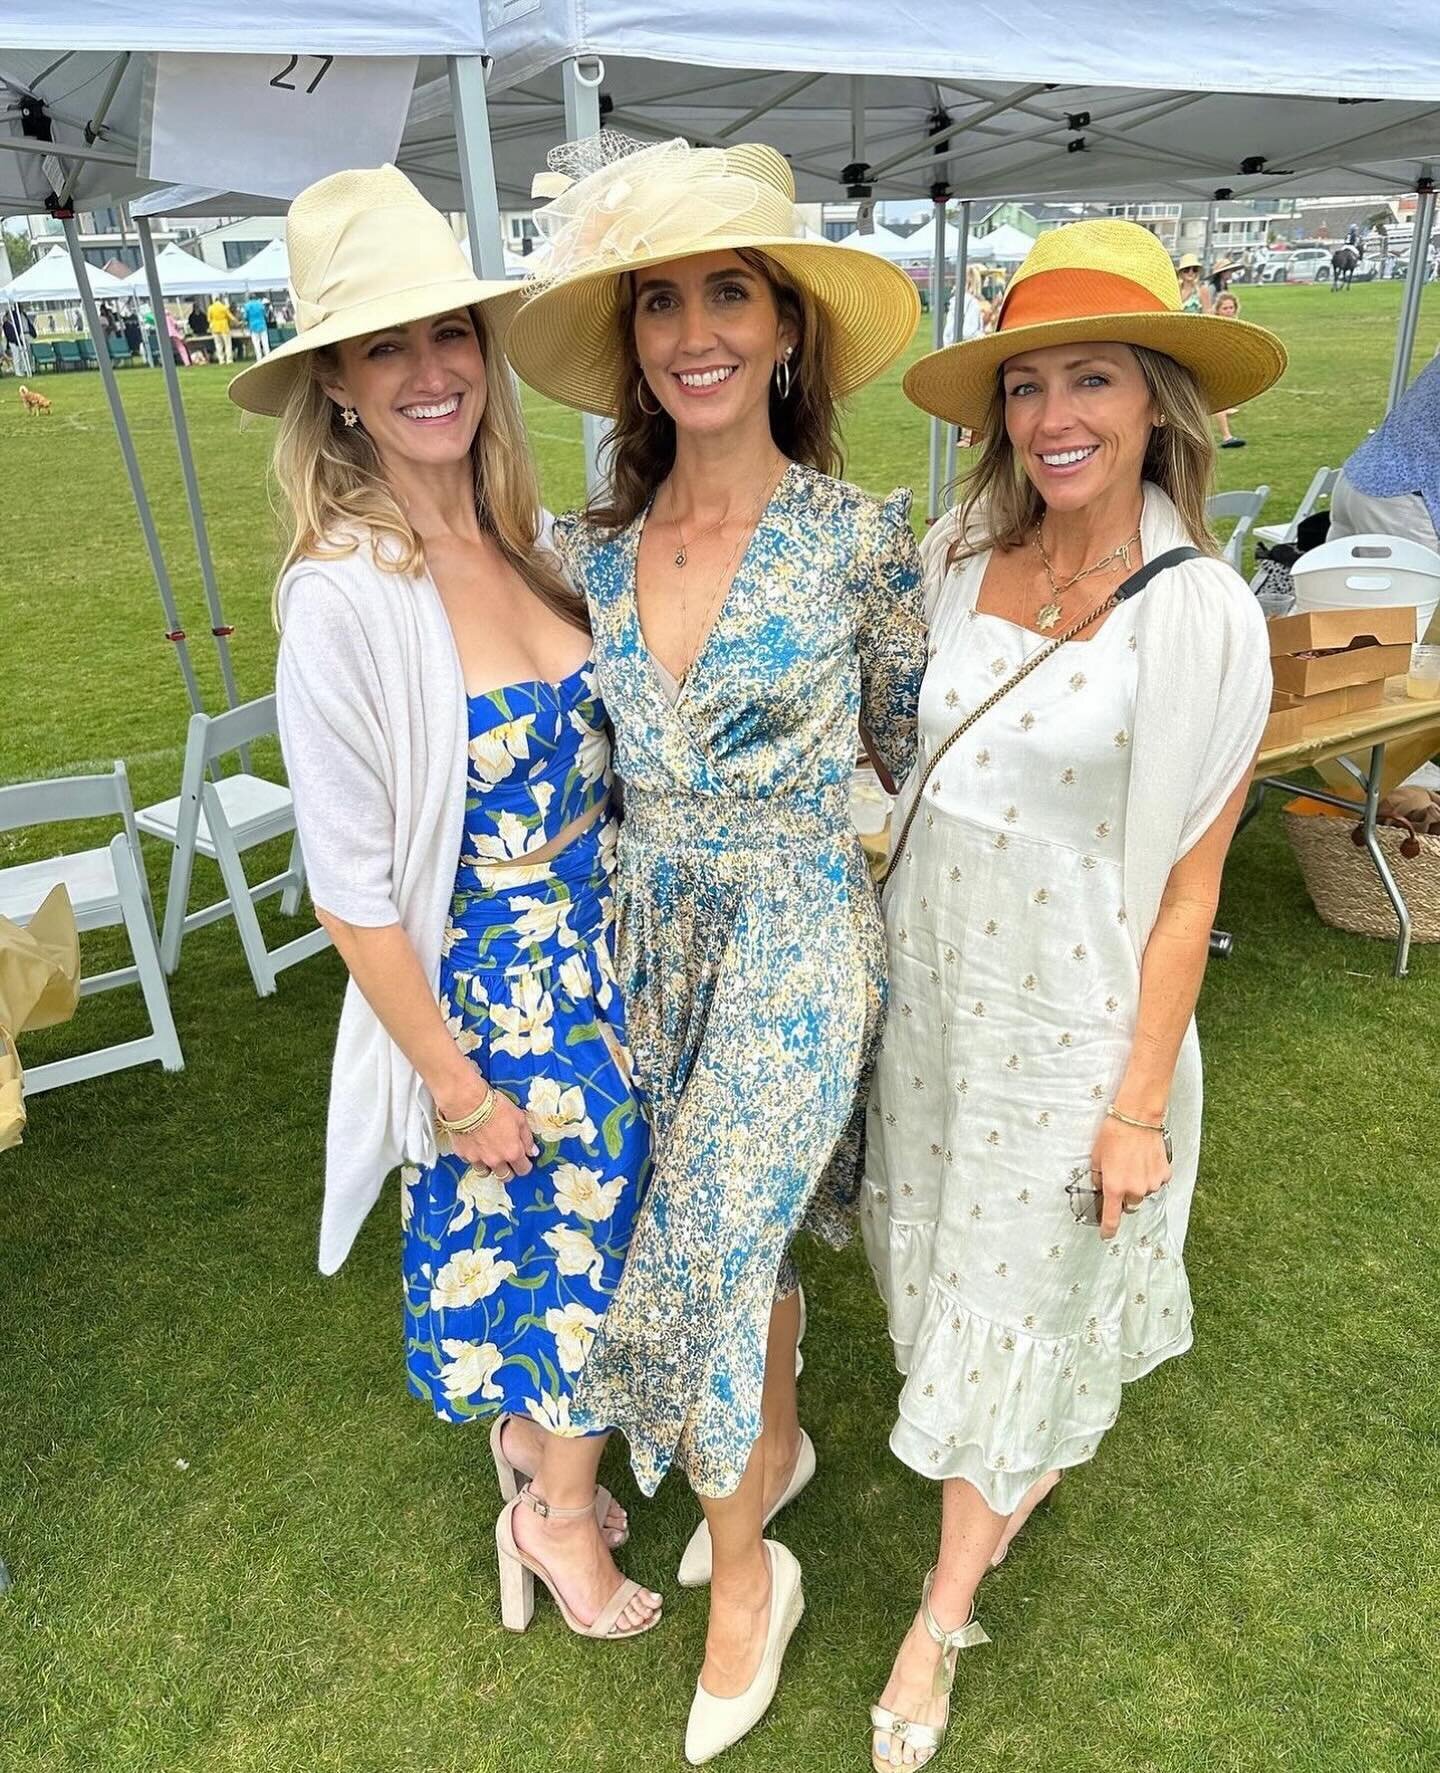 Get ready to turn heads at the polo field. Sport your fanciest hat and join us for a day of equestrian excitement. Whether you&rsquo;re going for classic elegance or bold and playful, there will be competition, so show off your style in your best hat